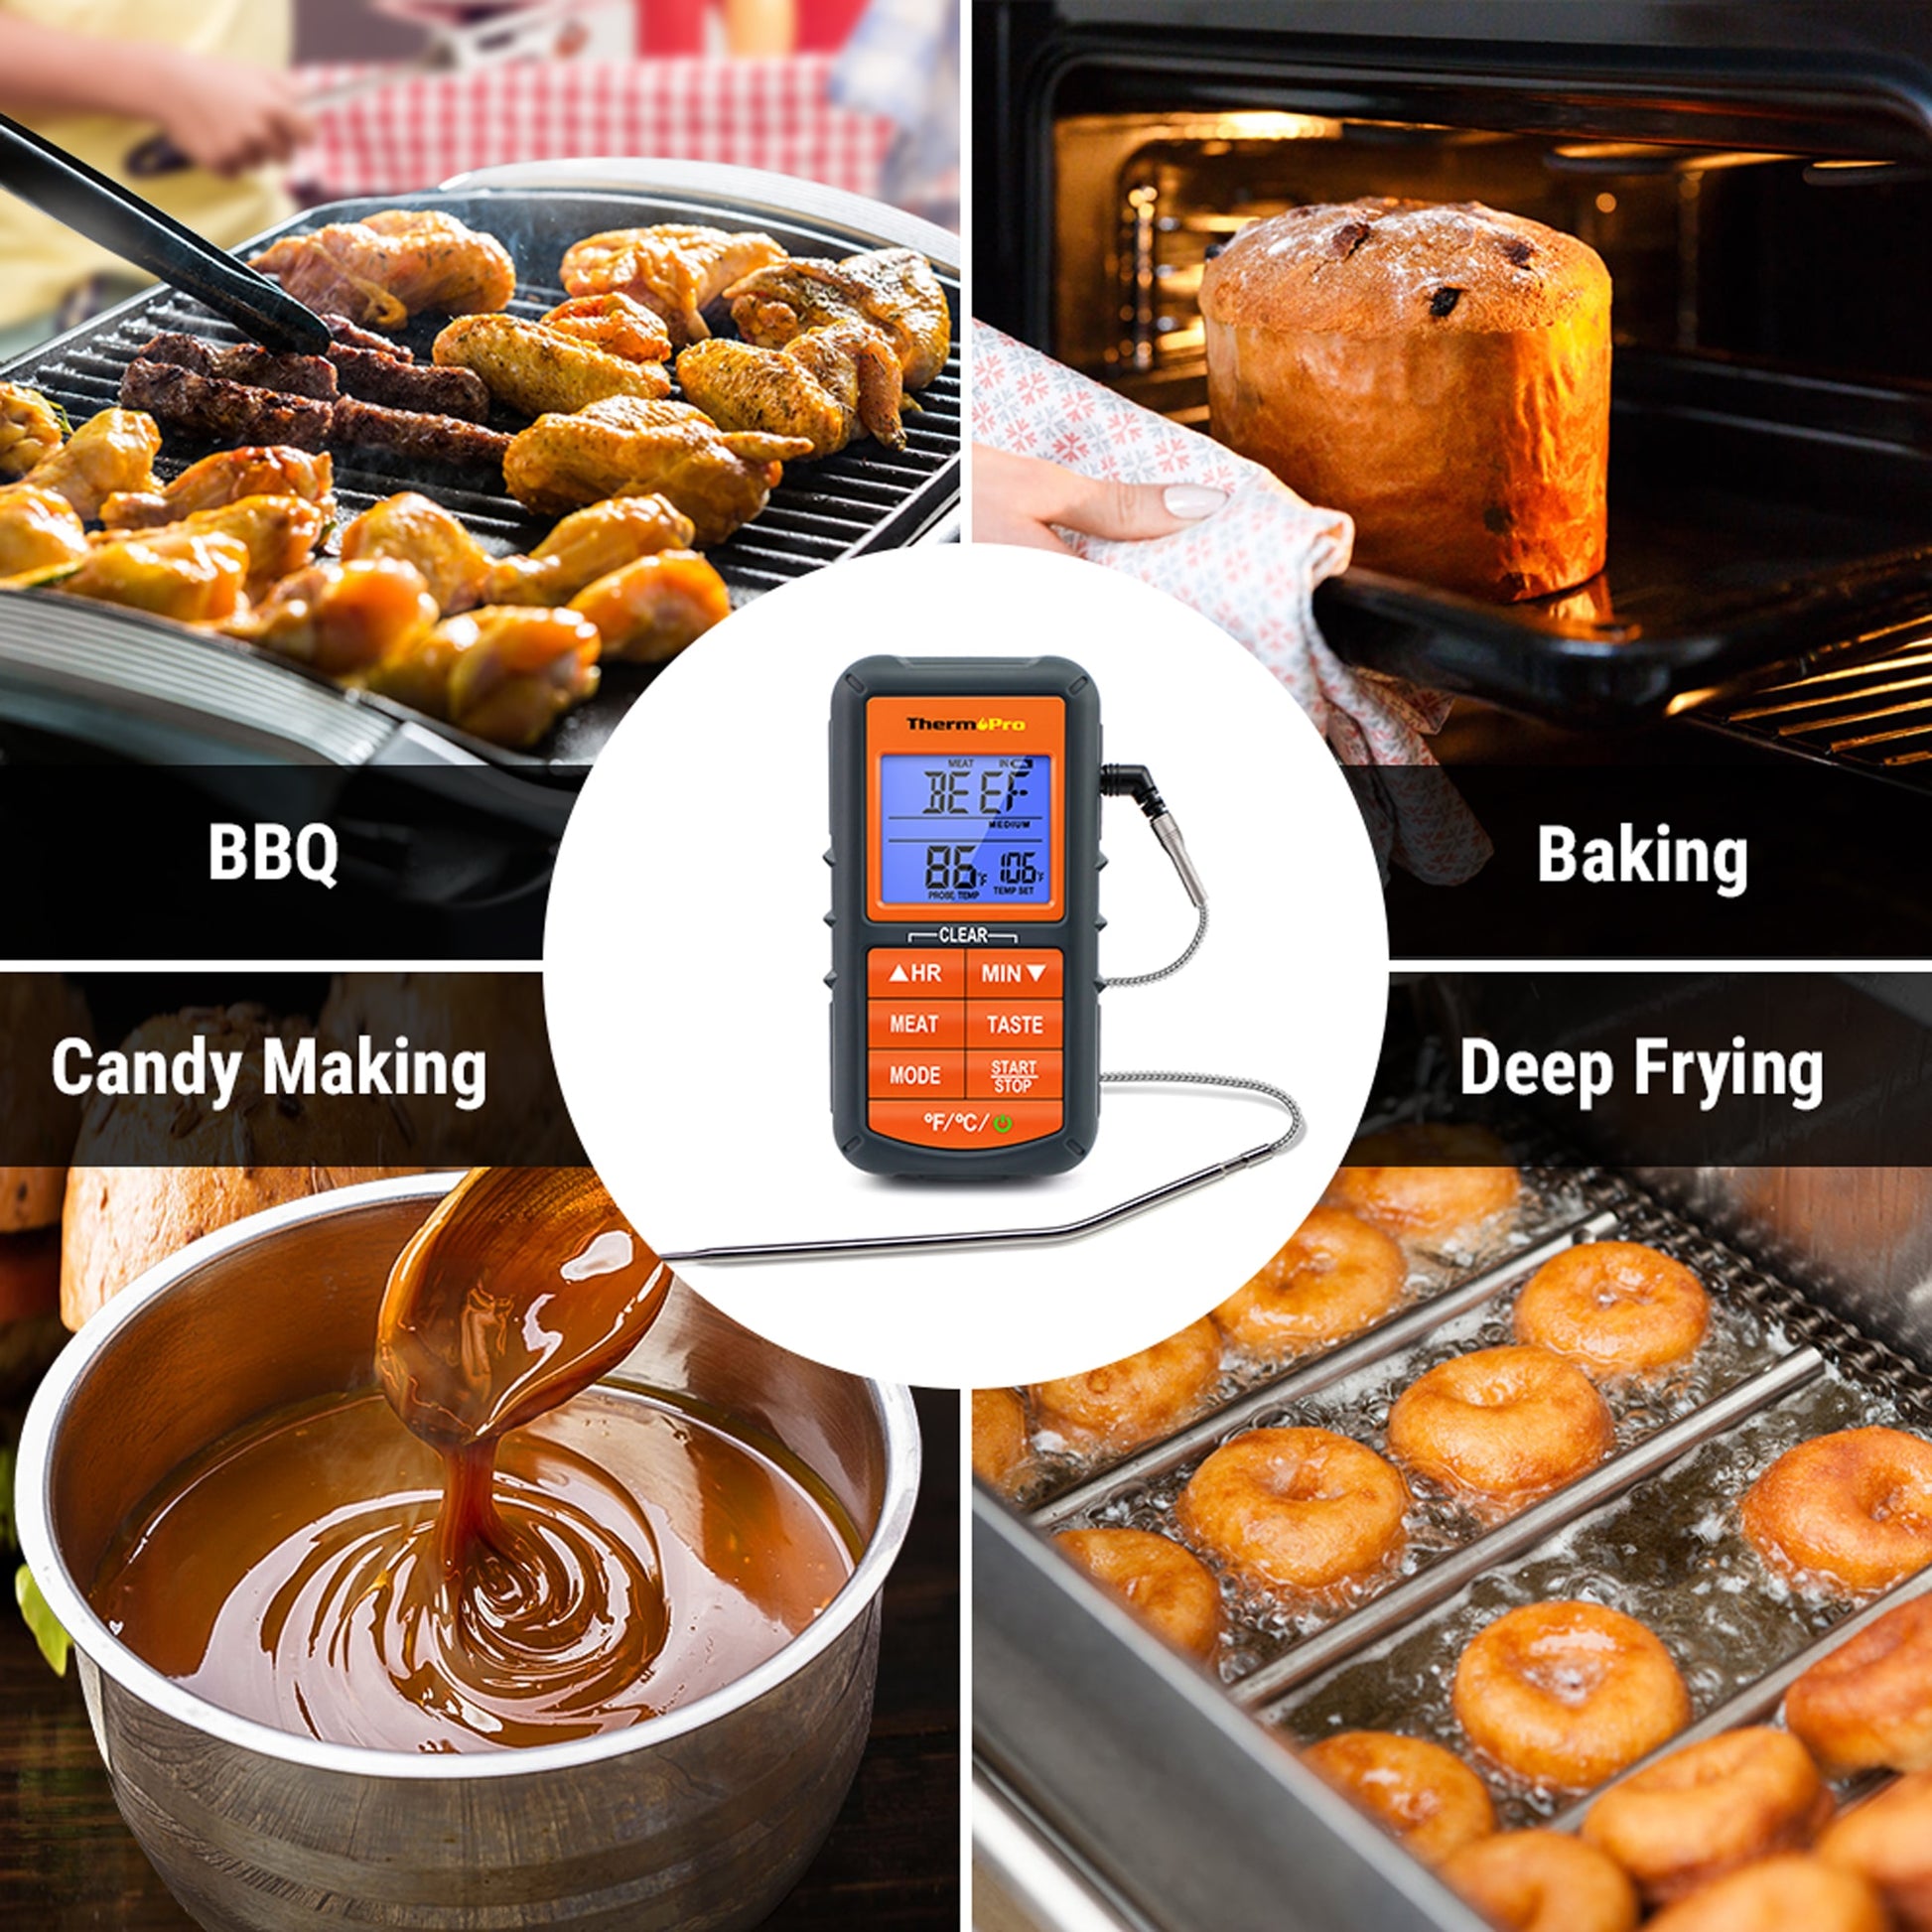 ThermPro Digital Probe Meat Thermometer – Wear-Mood-Store